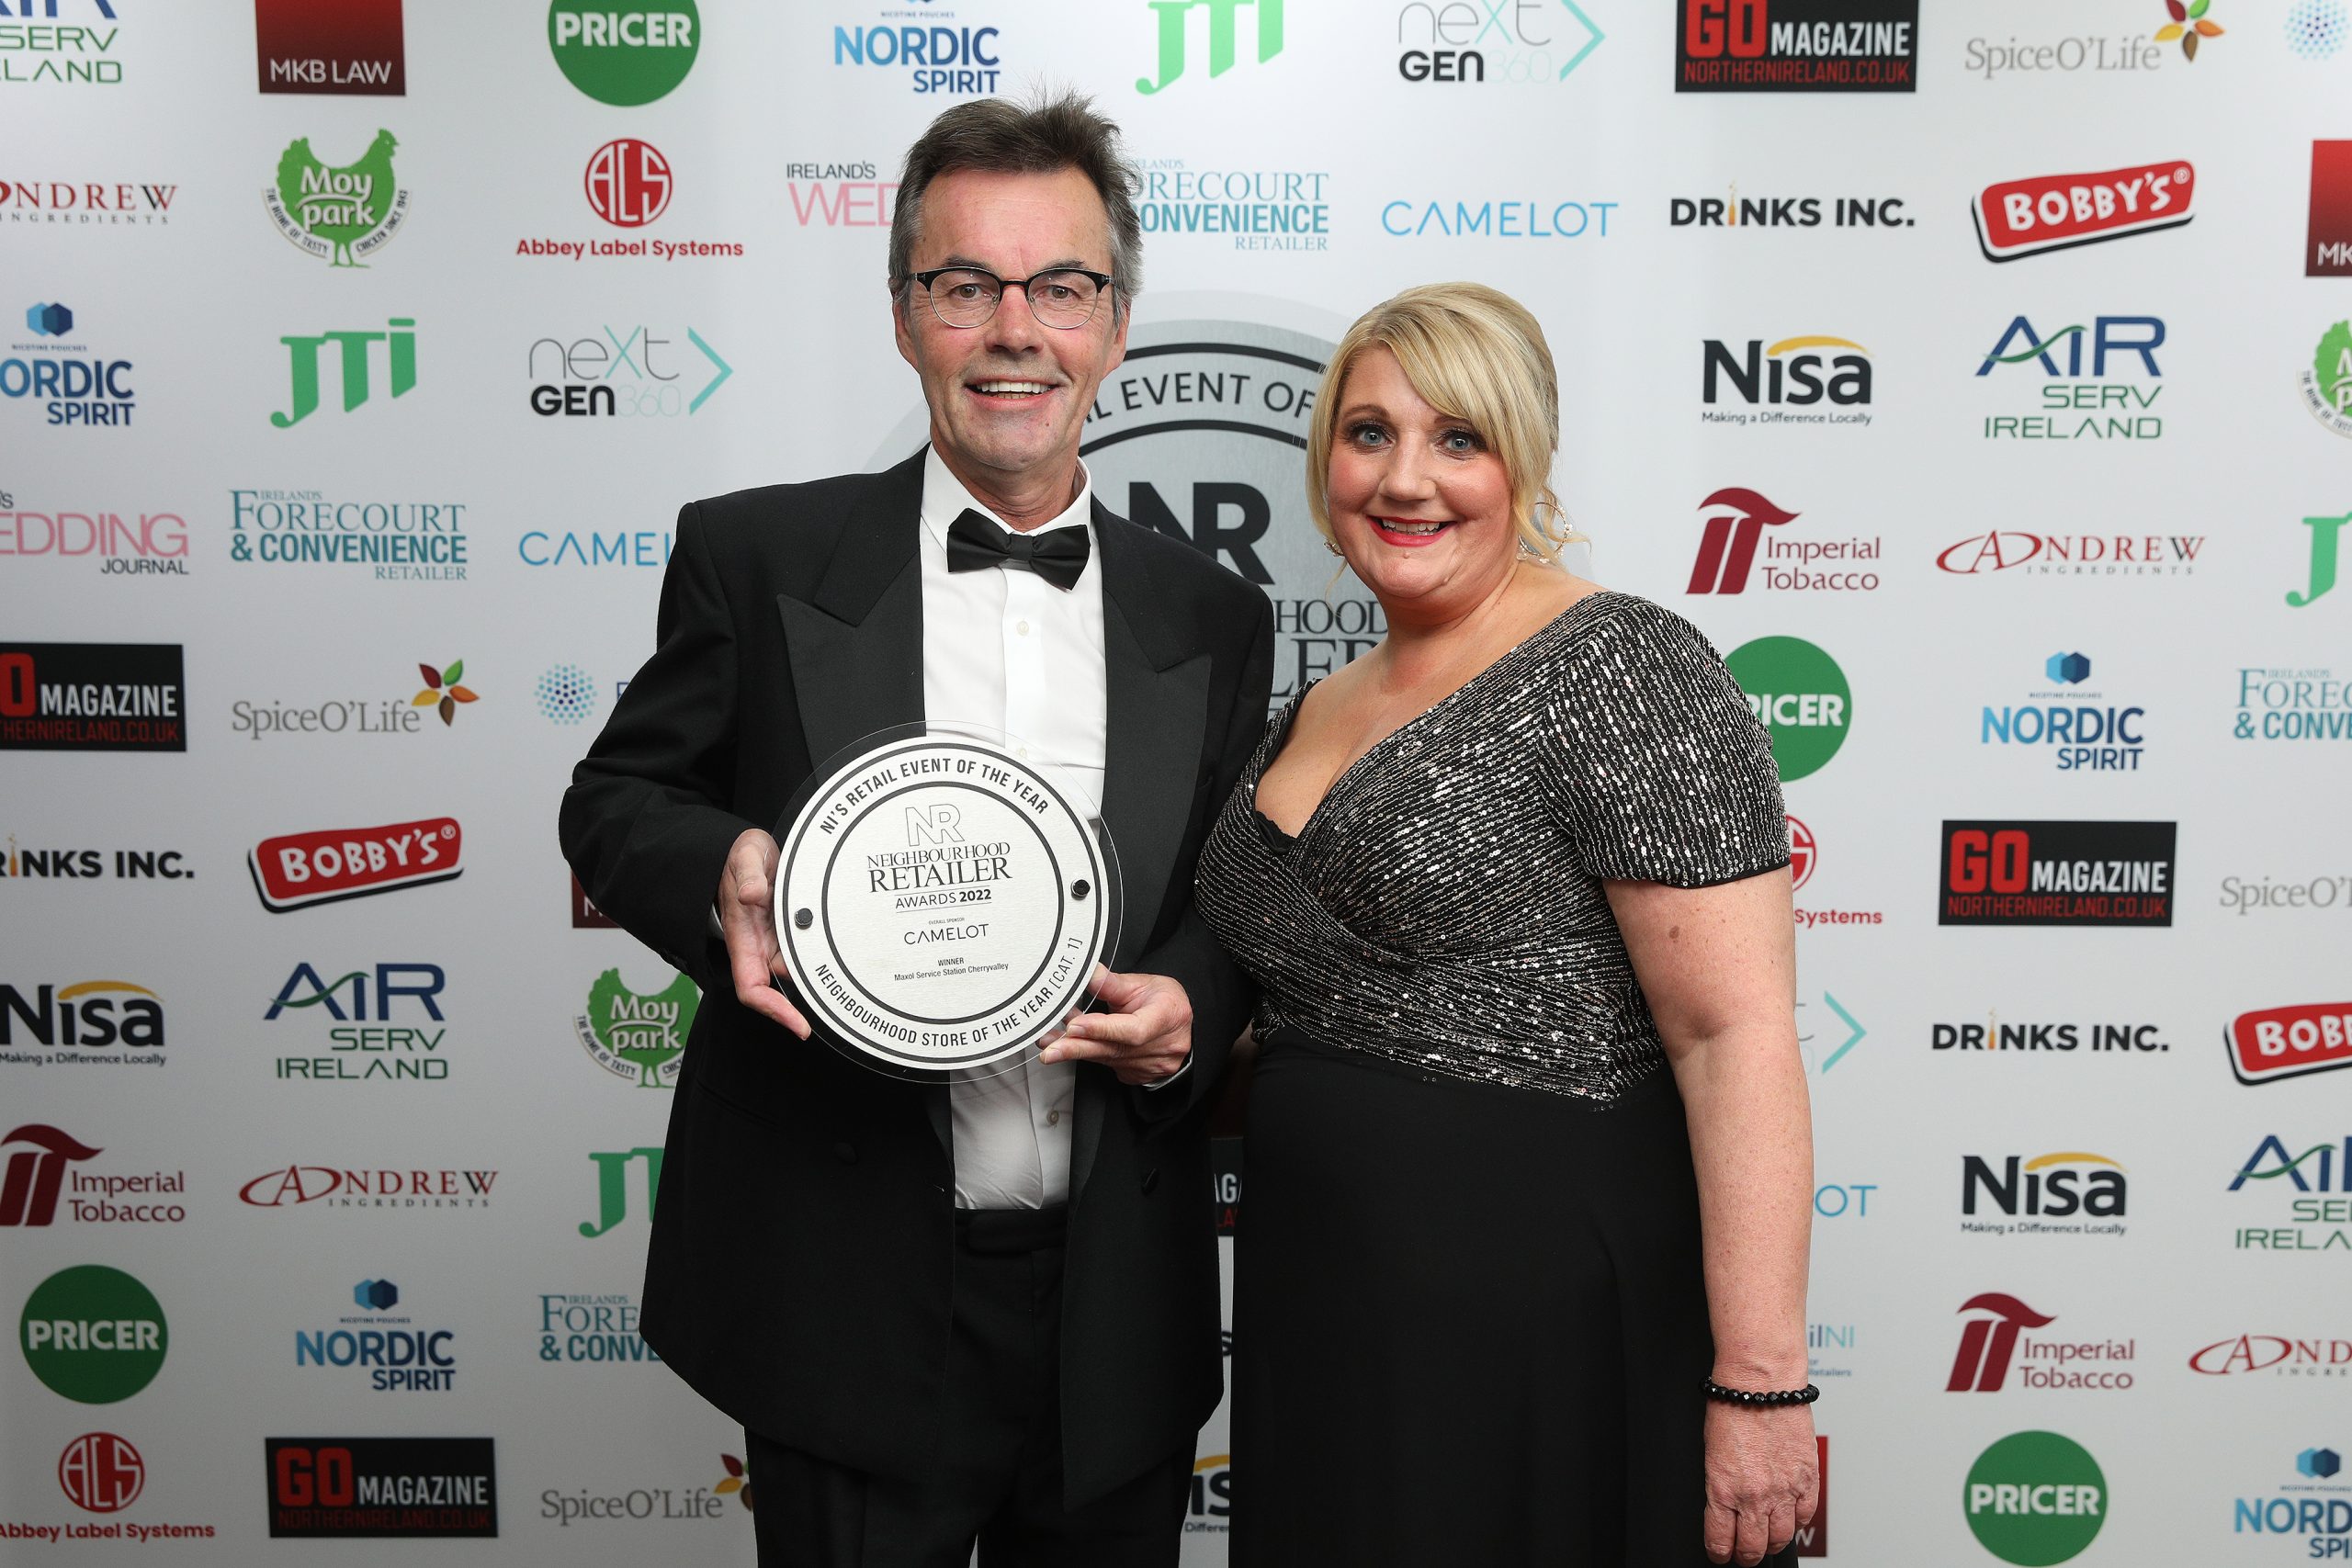 Award win is the Cherry on top for Belfast store